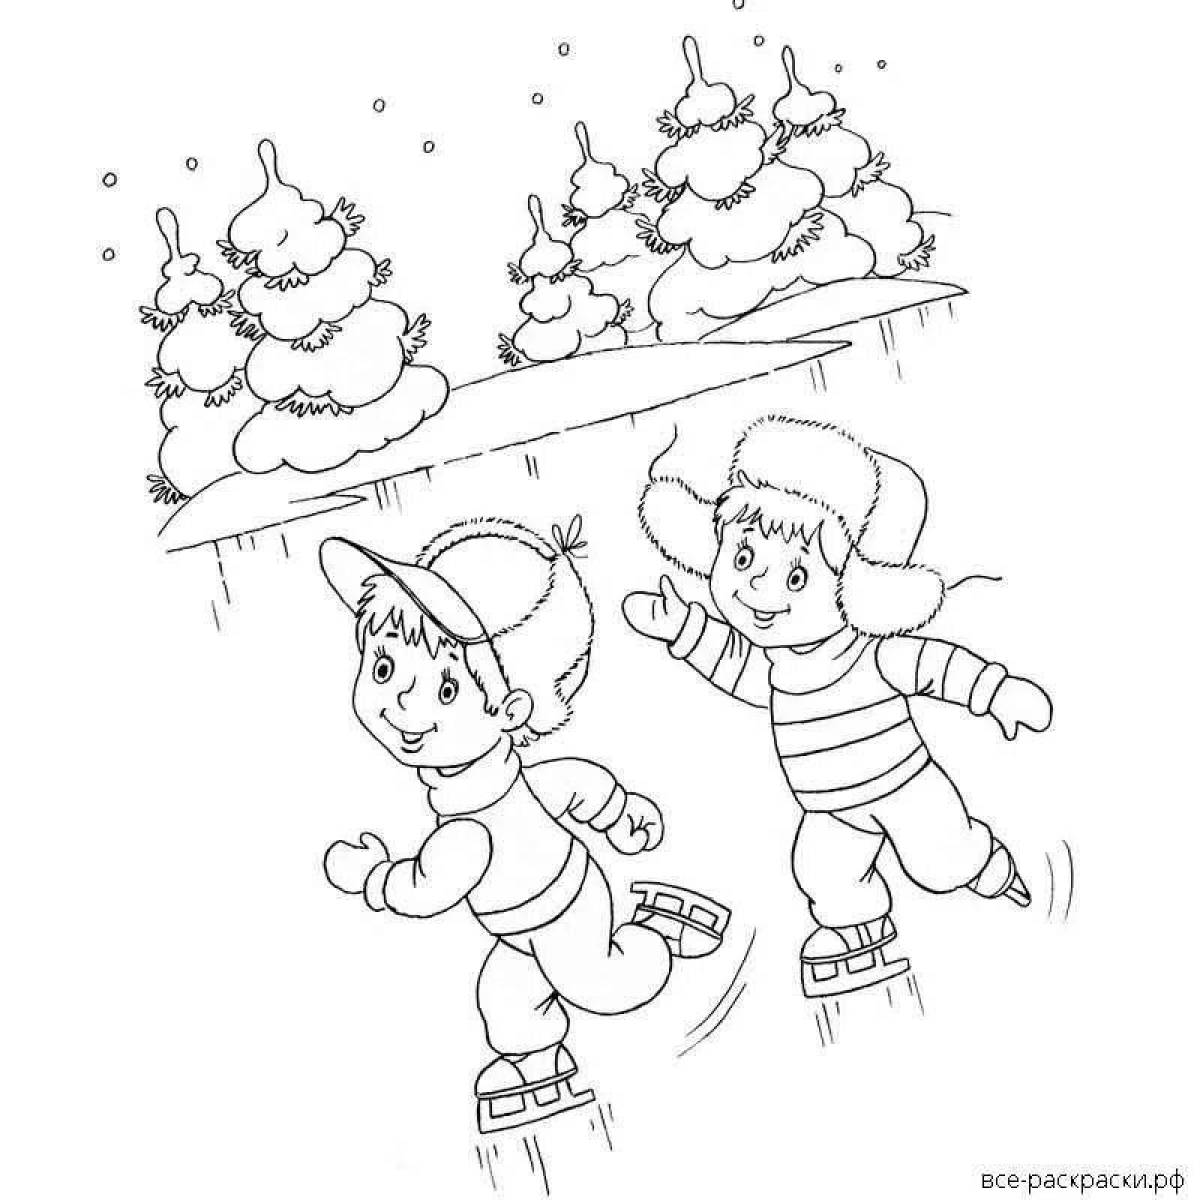 Coloring page charming winter walk